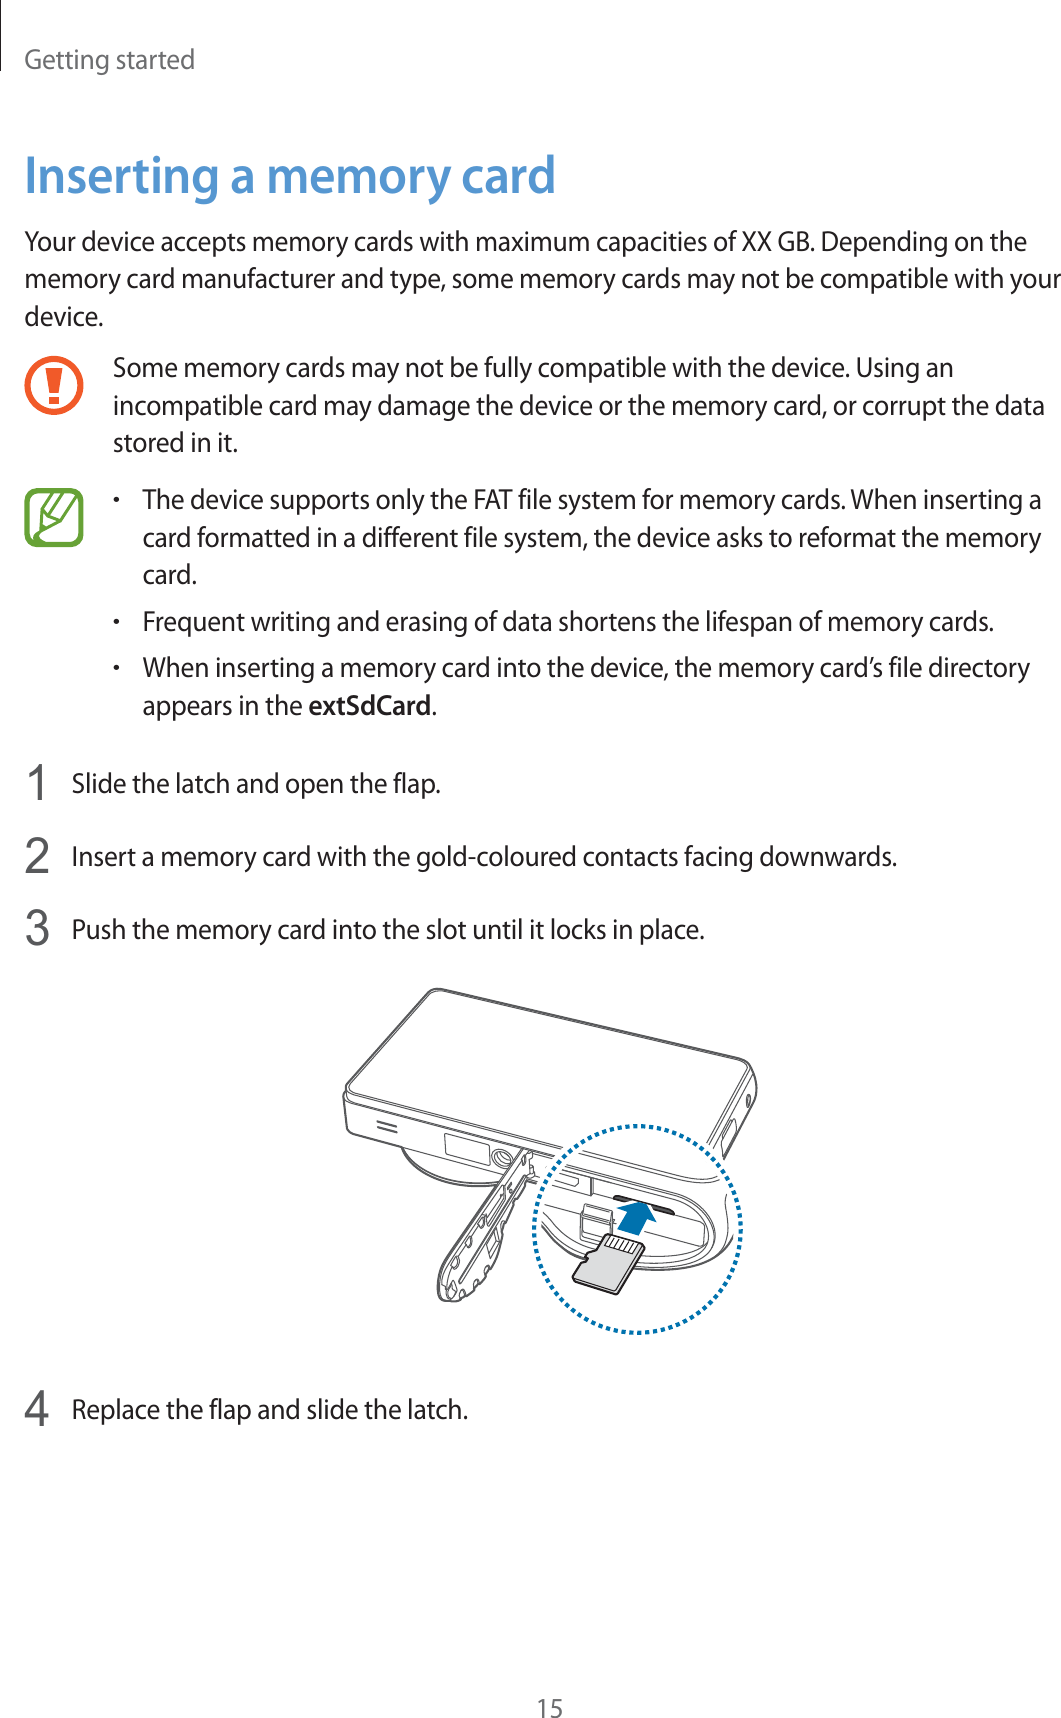 Getting started15Inserting a memory cardYour device accepts memory cards with maximum capacities of XX GB. Depending on the memory card manufacturer and type, some memory cards may not be compatible with your device.Some memory cards may not be fully compatible with the device. Using an incompatible card may damage the device or the memory card, or corrupt the data stored in it.rThe device supports only the FAT file system for memory cards. When inserting a card formatted in a different file system, the device asks to reformat the memory card.rFrequent writing and erasing of data shortens the lifespan of memory cards.rWhen inserting a memory card into the device, the memory card’s file directory appears in the extSdCard.1  Slide the latch and open the flap.2  Insert a memory card with the gold-coloured contacts facing downwards.3  Push the memory card into the slot until it locks in place.4  Replace the flap and slide the latch.